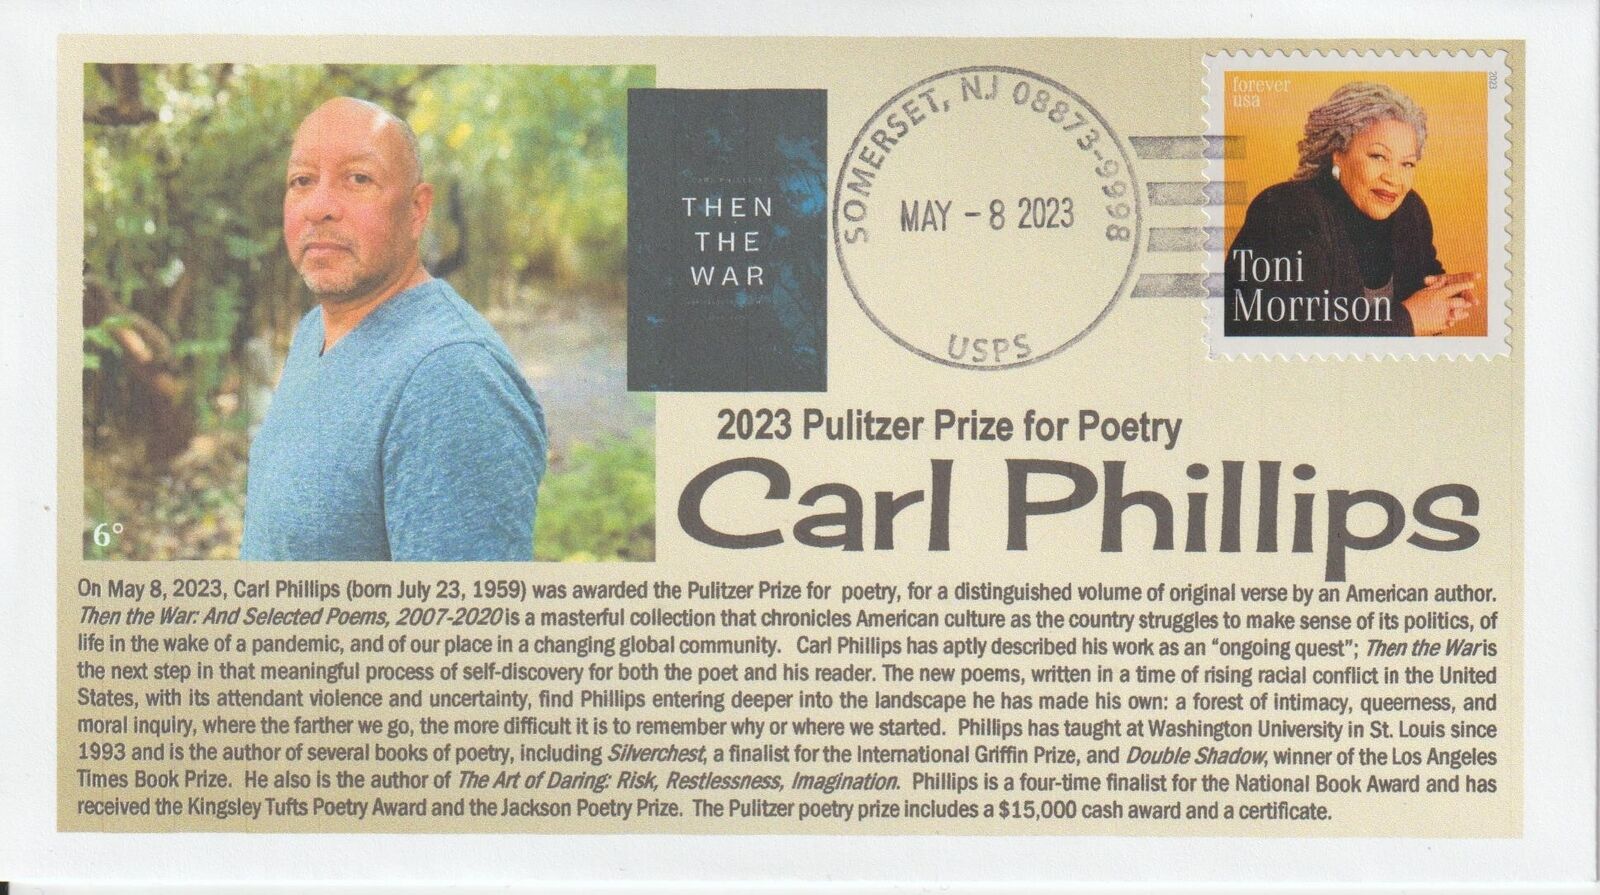 6° Cachets Pulitzer Prize 2023 Poetry / Carl Phillips Then the War WU St. Louis